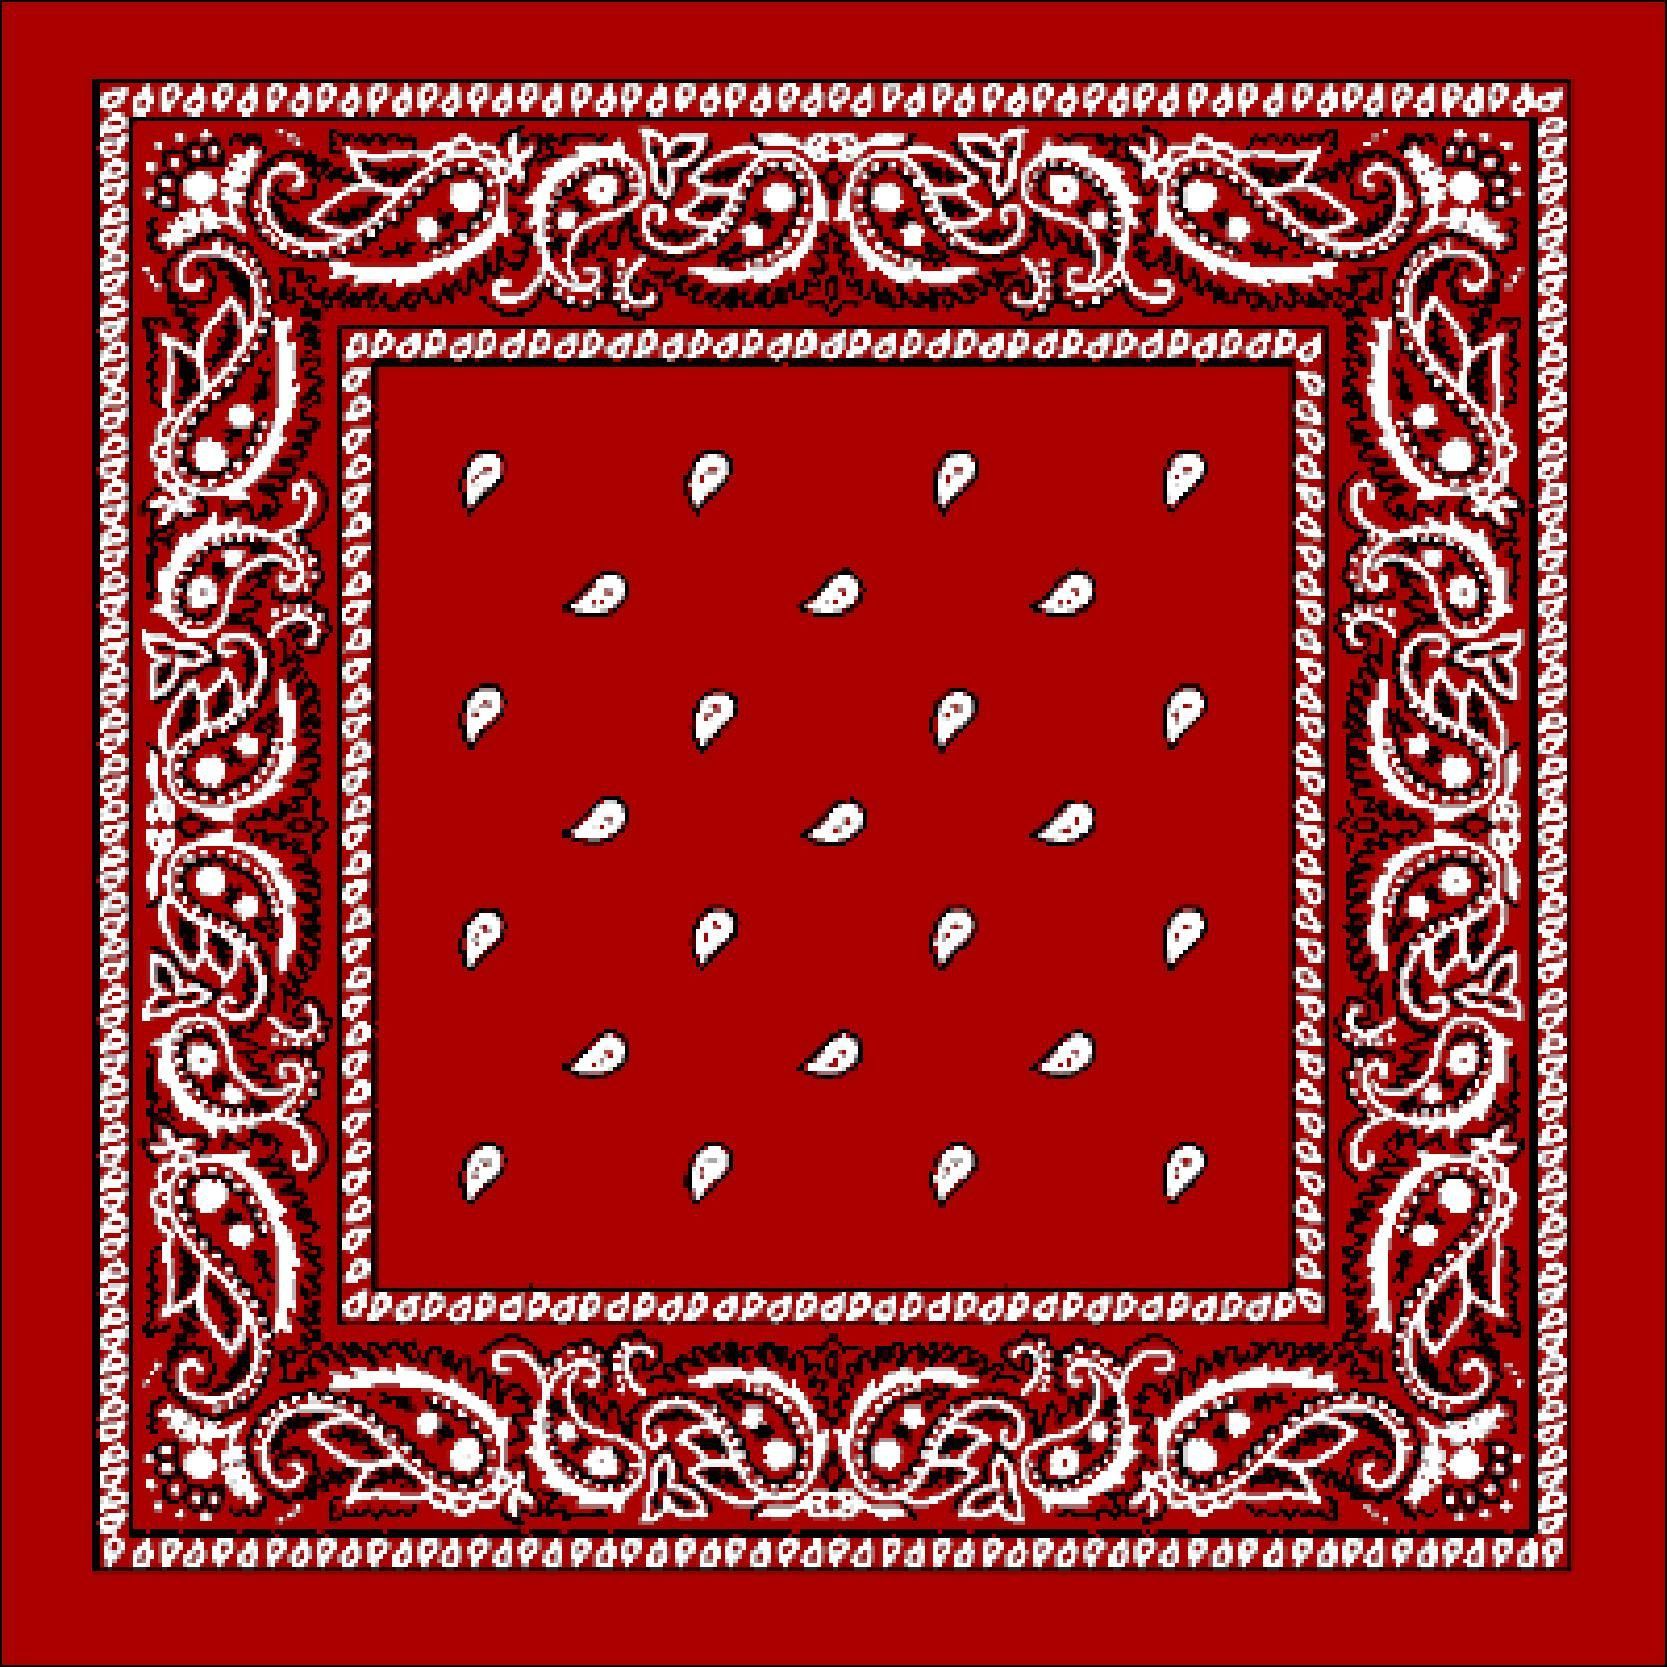 Bandana wallpaper by Marluxia9826  Download on ZEDGE  f102